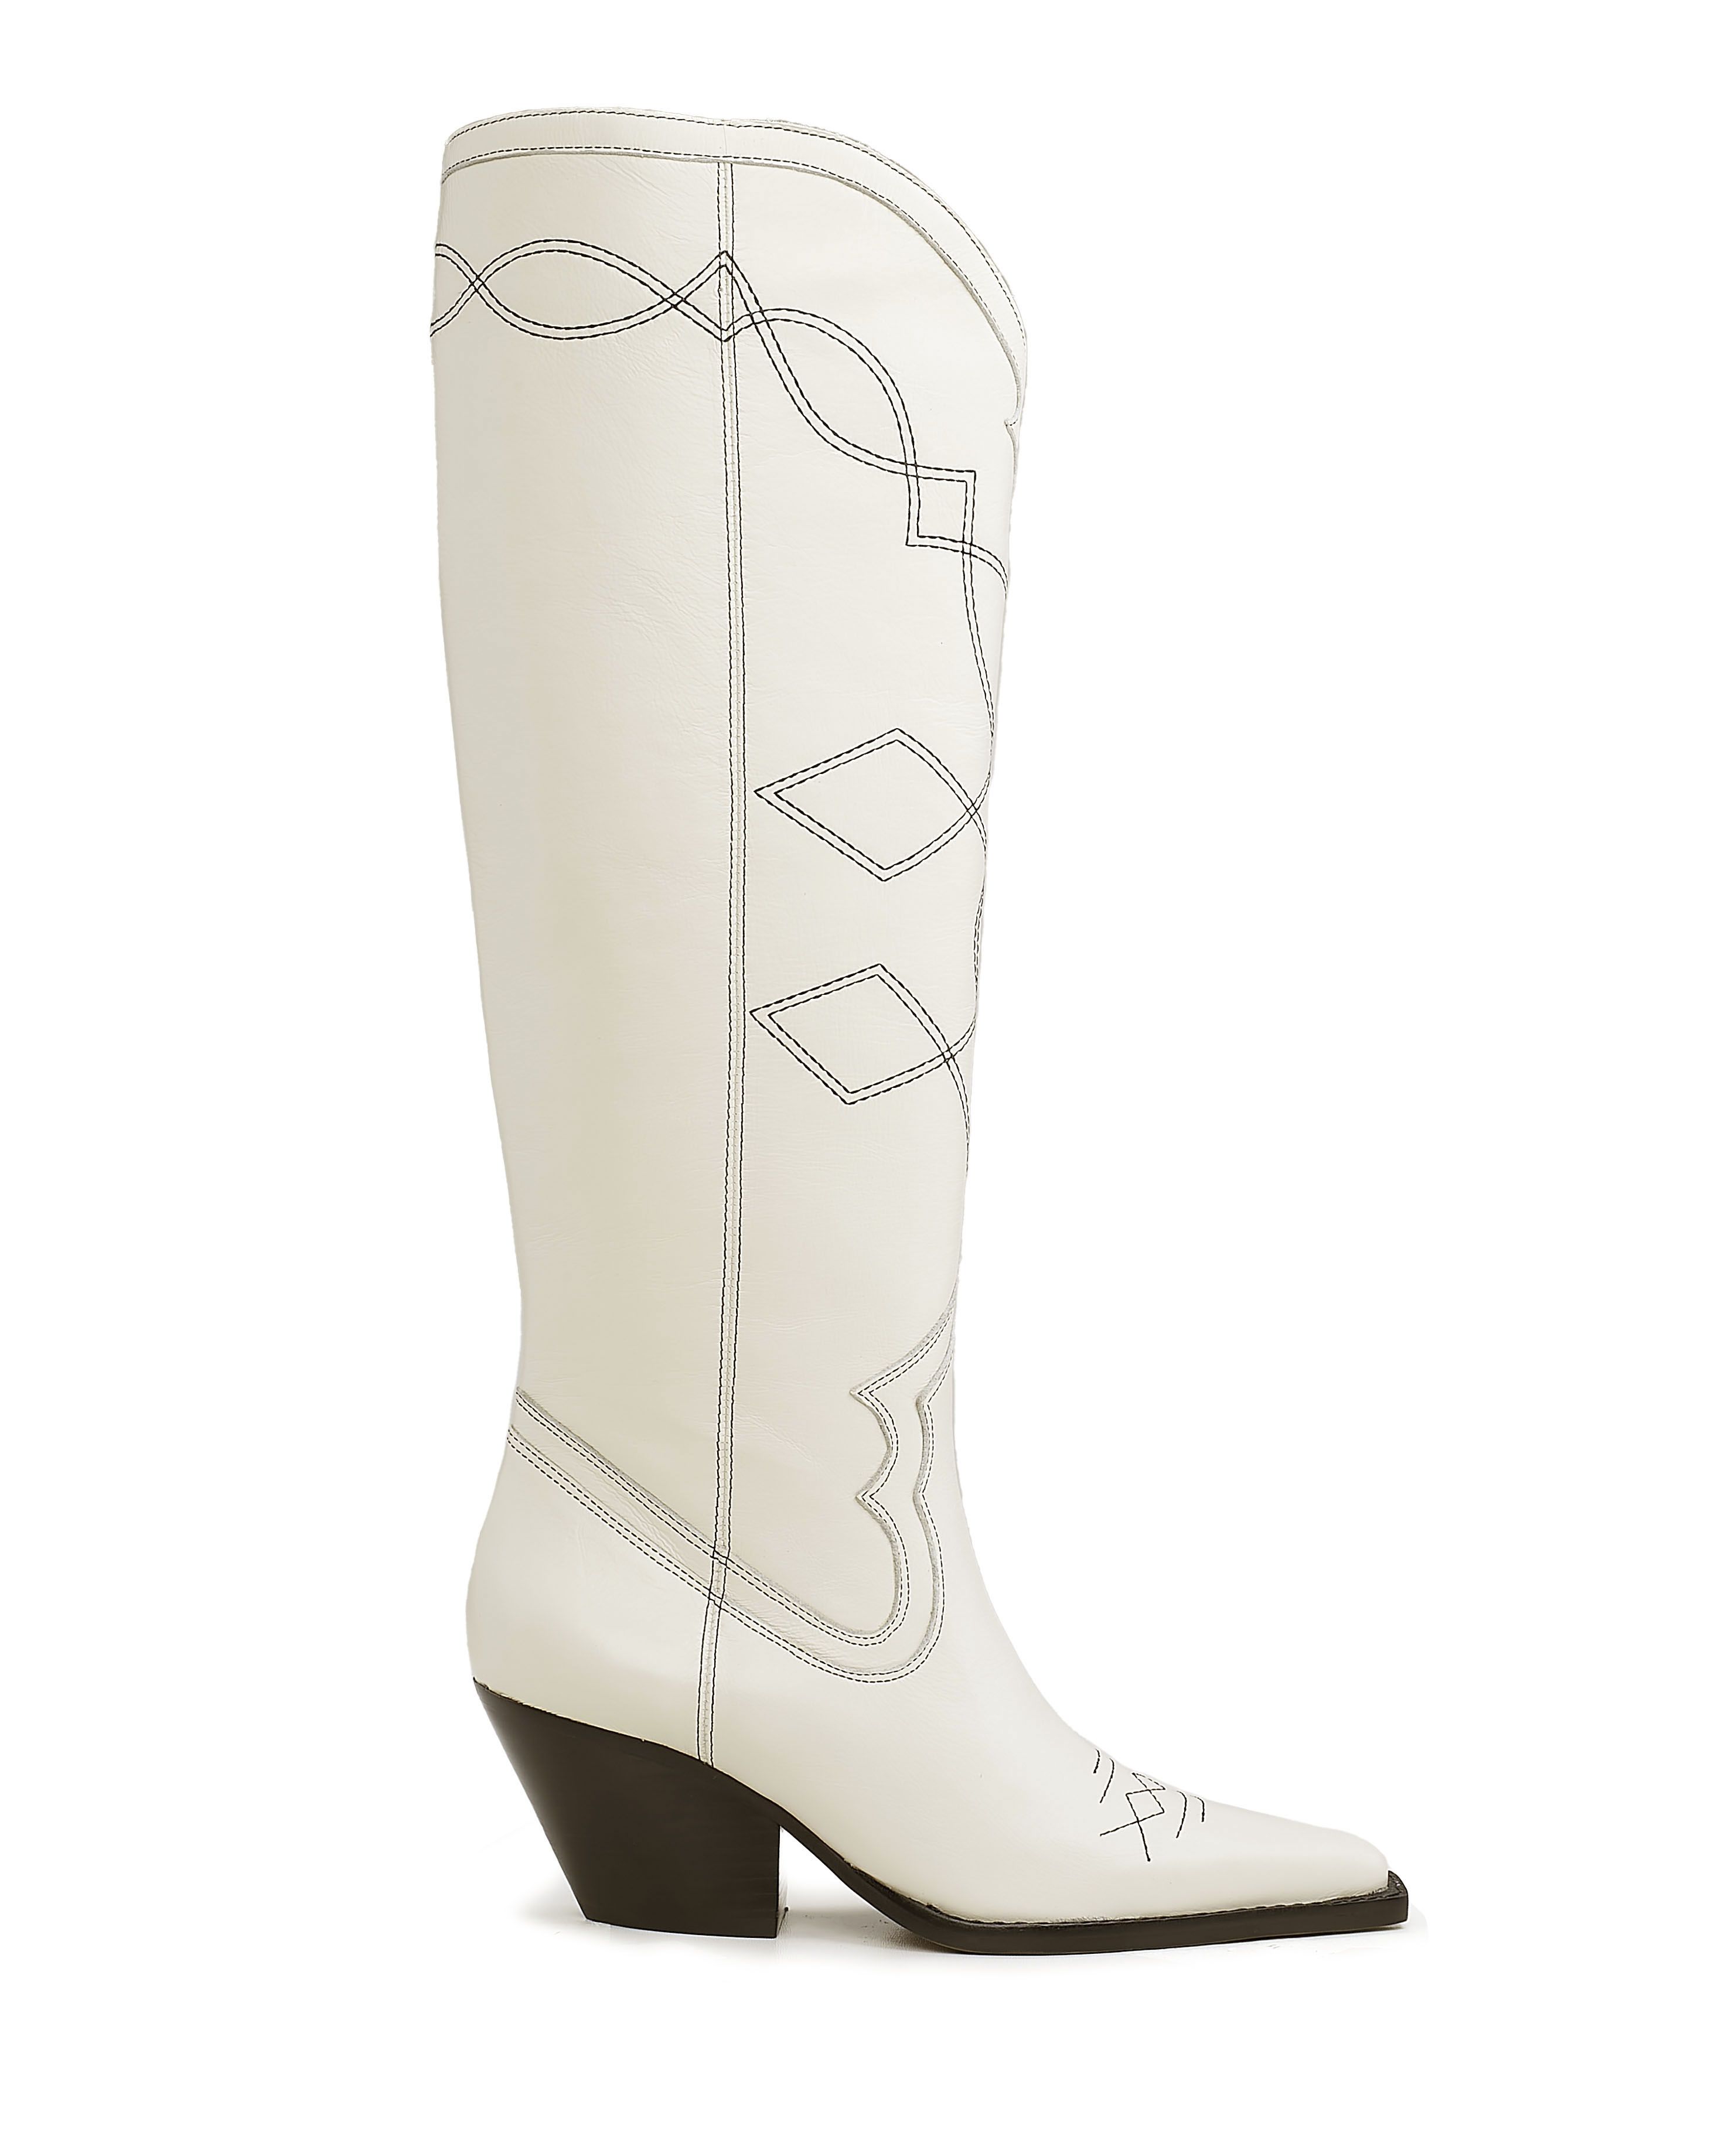 Vince Camuto Nedema Boot | Vince Camuto